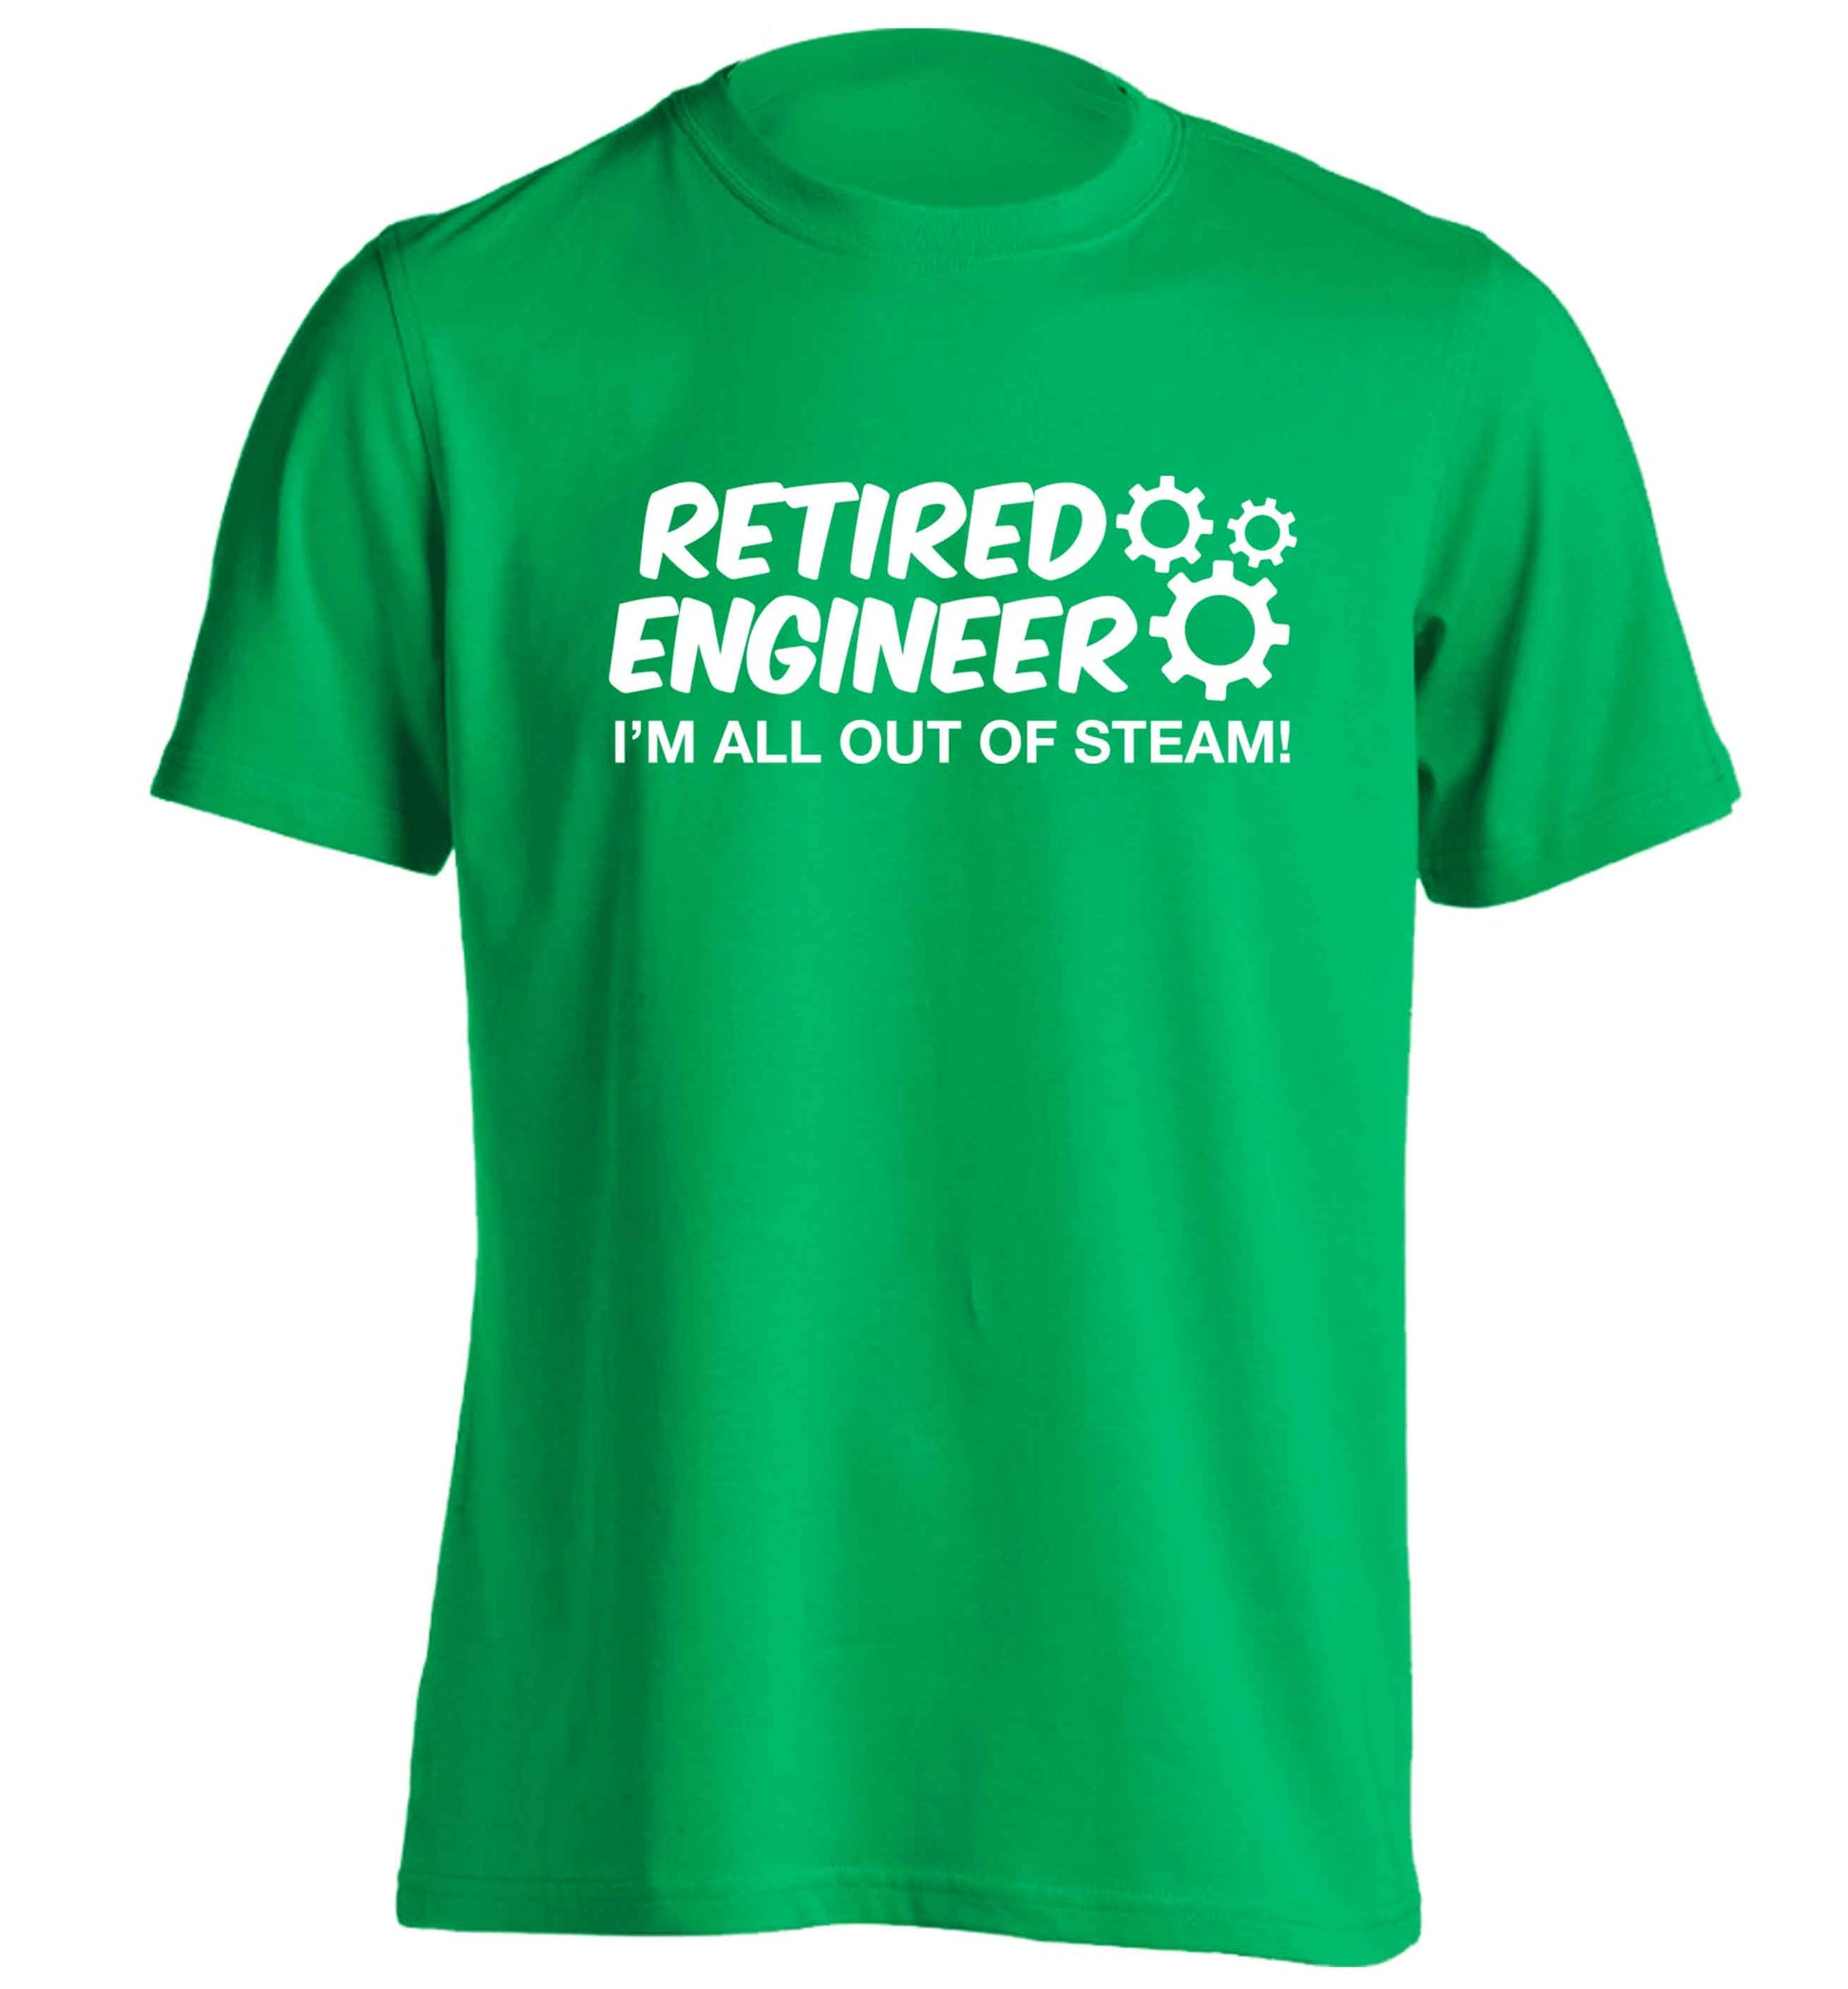 Retired engineer I'm all out of steam adults unisex green Tshirt 2XL